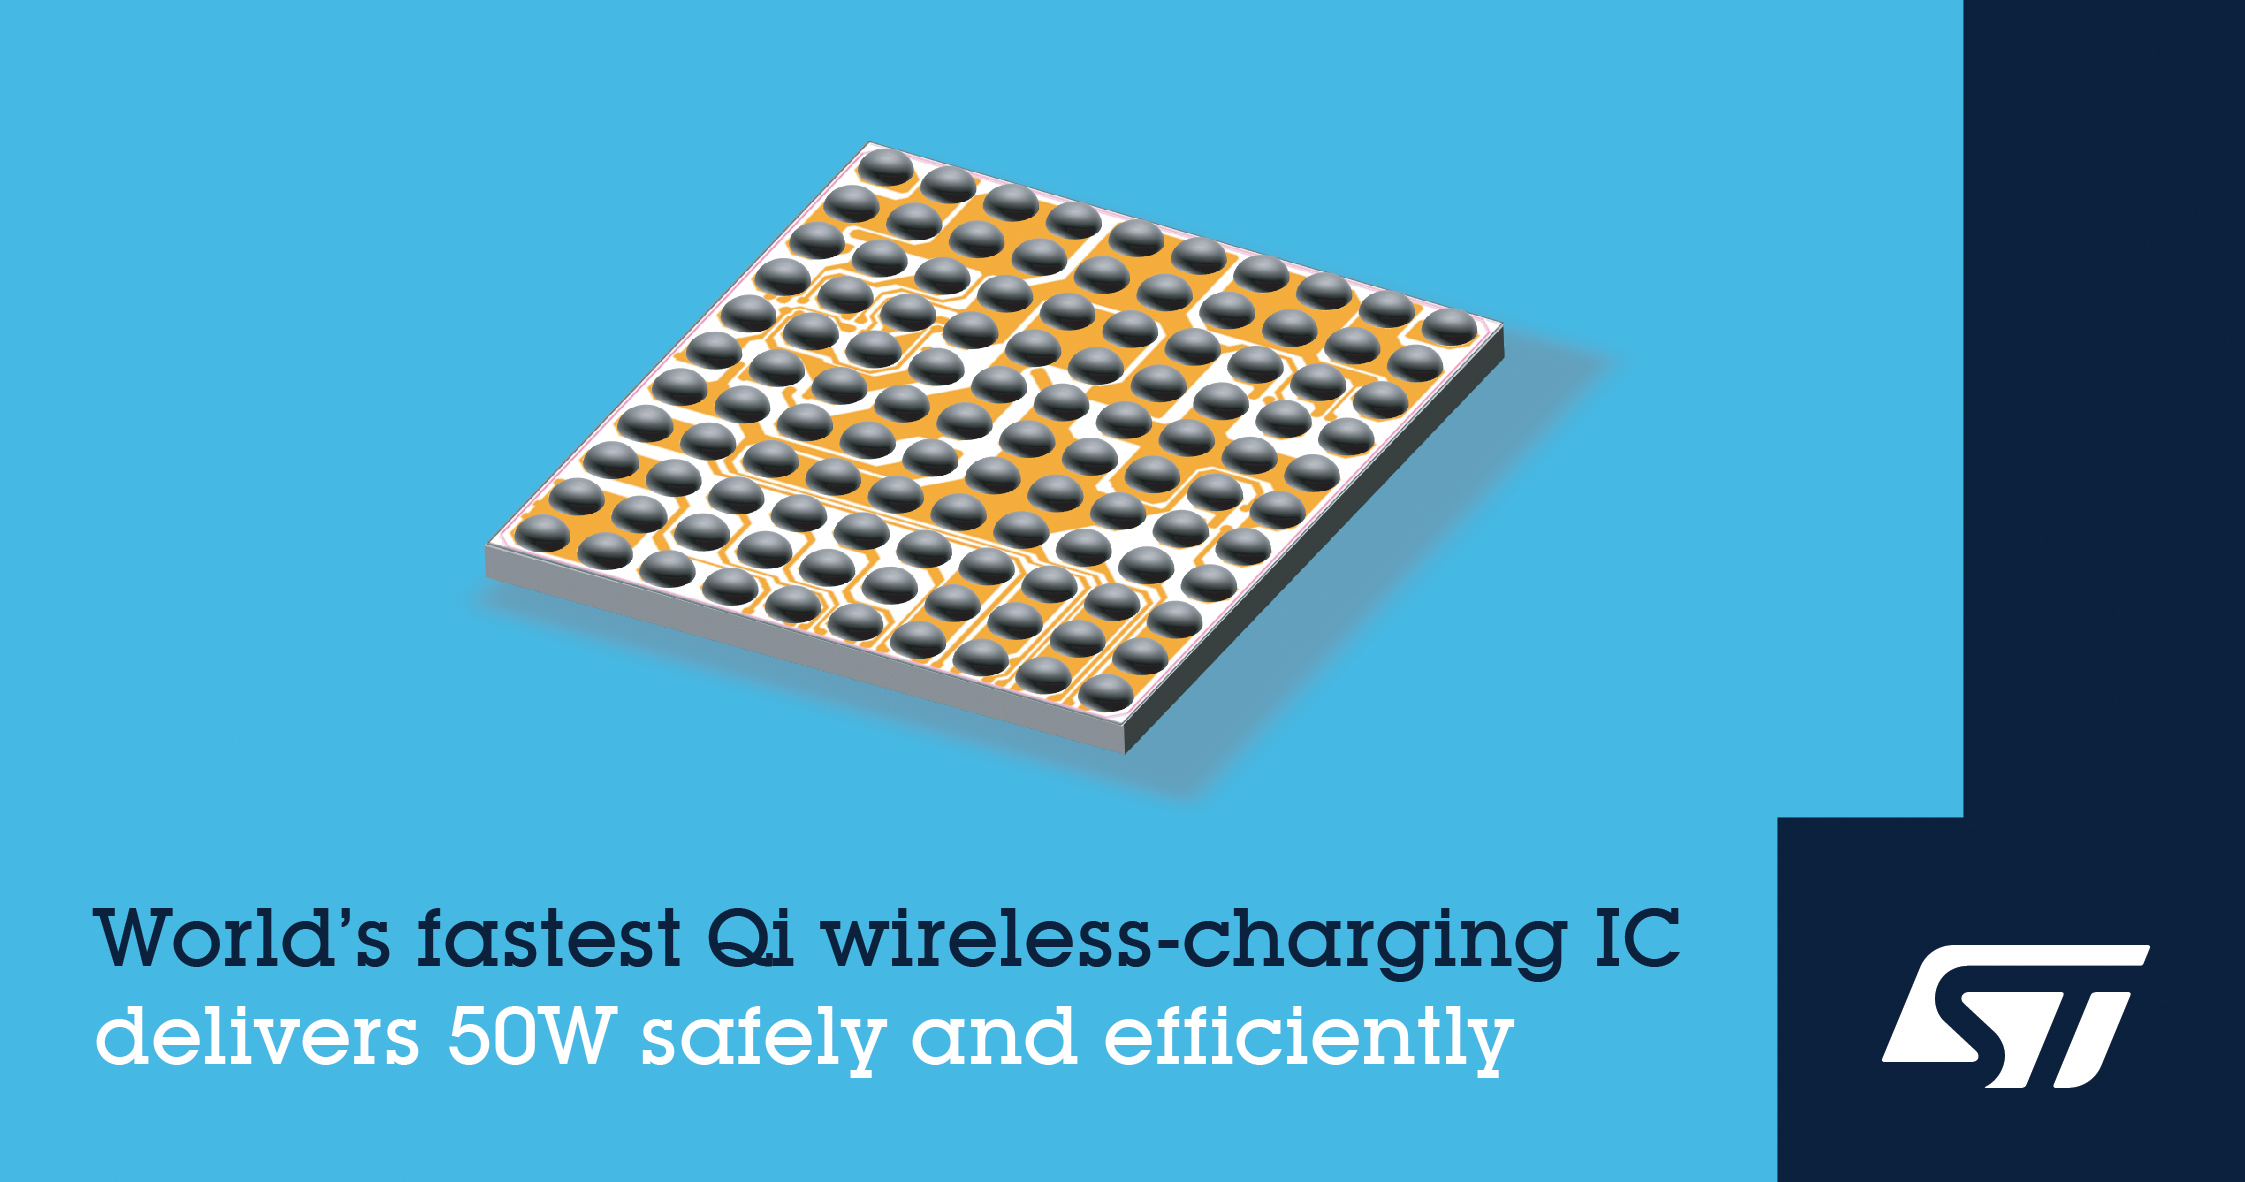 STMicroelectronics Unveils World’s Fastest 50W Qi Wireless-Charging IC